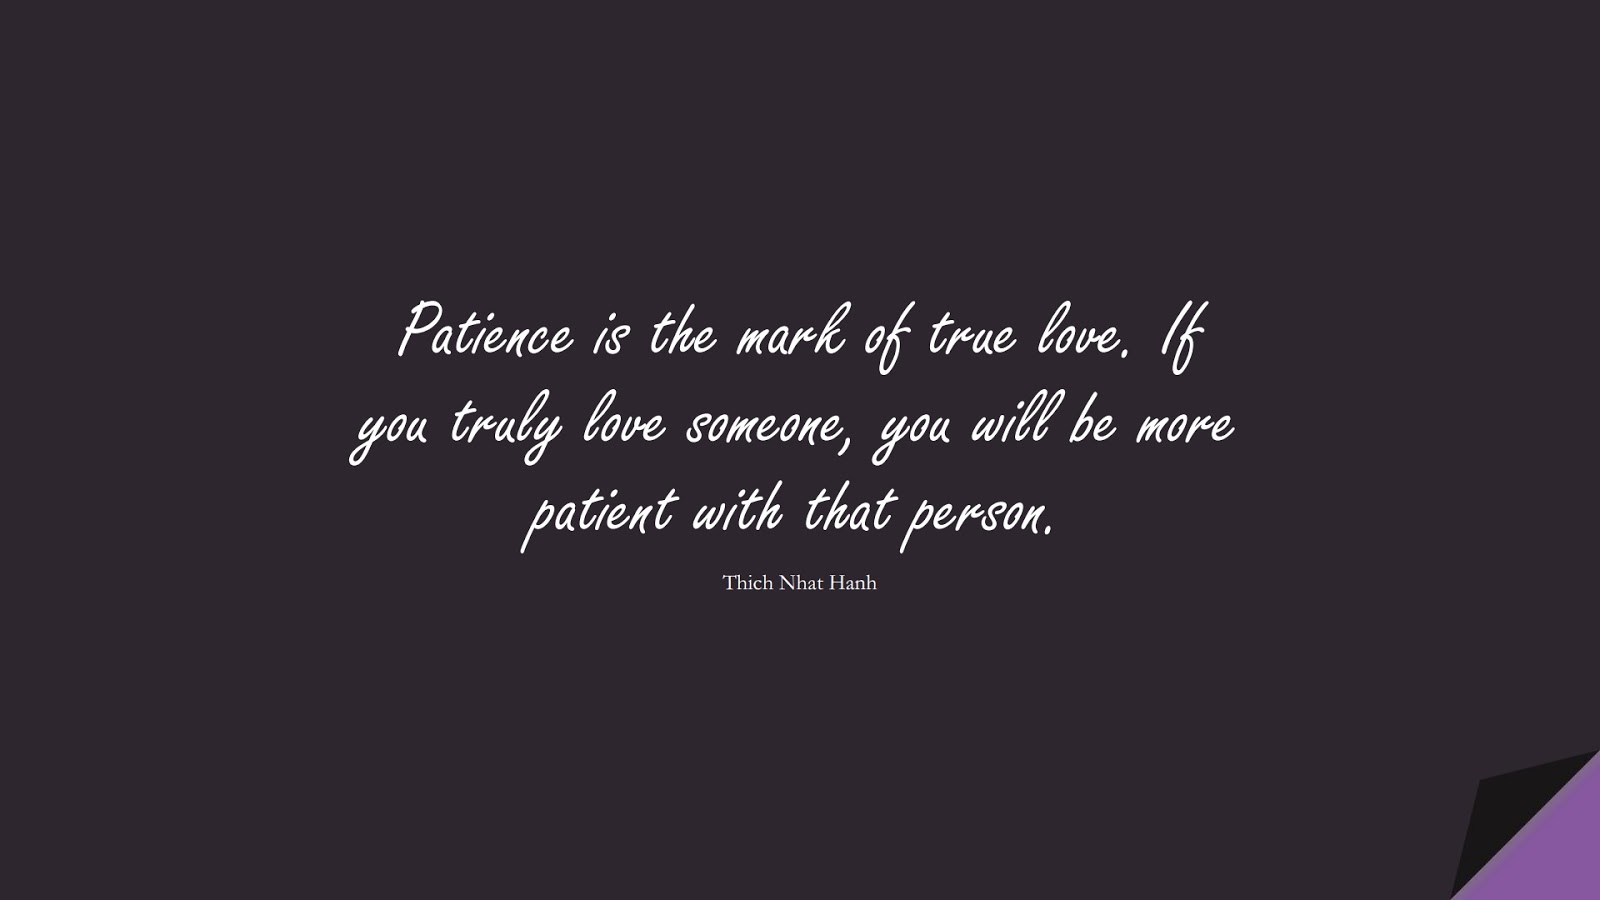 Patience is the mark of true love. If you truly love someone, you will be more patient with that person. (Thich Nhat Hanh);  #LoveQuotes